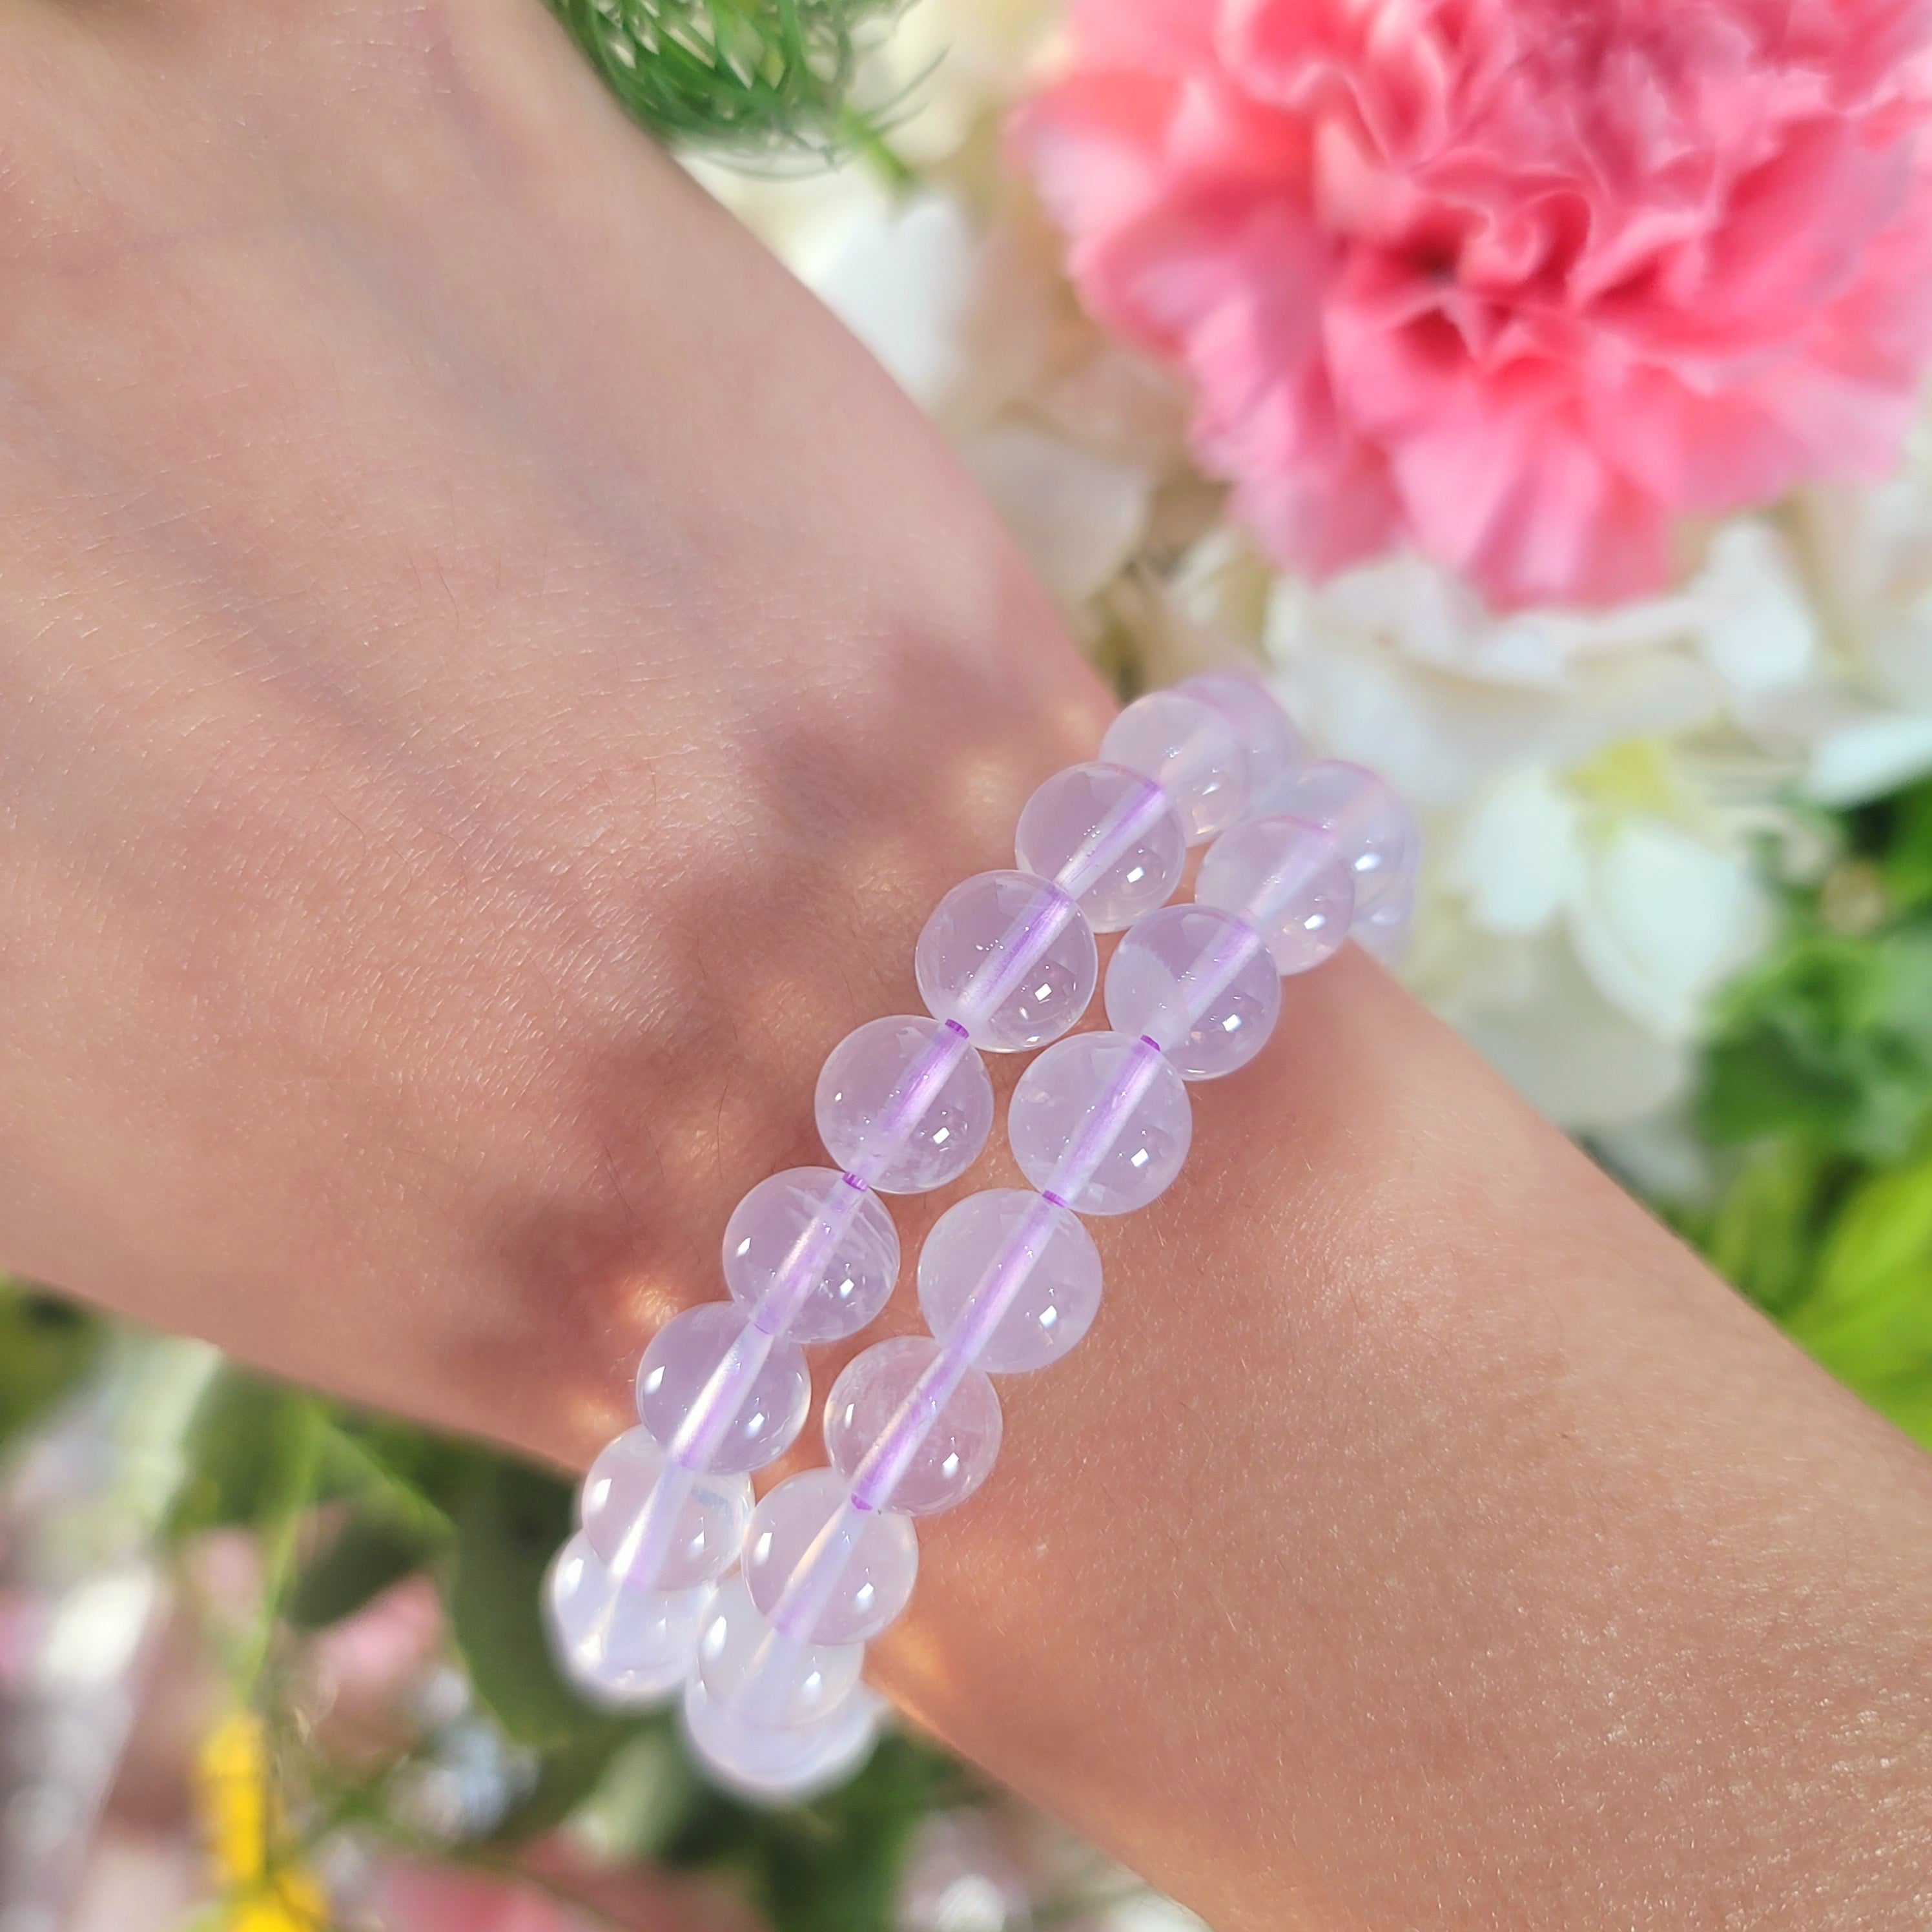 Amethyst "Lavender Moon Quartz" Bracelet for Intuition and Protection